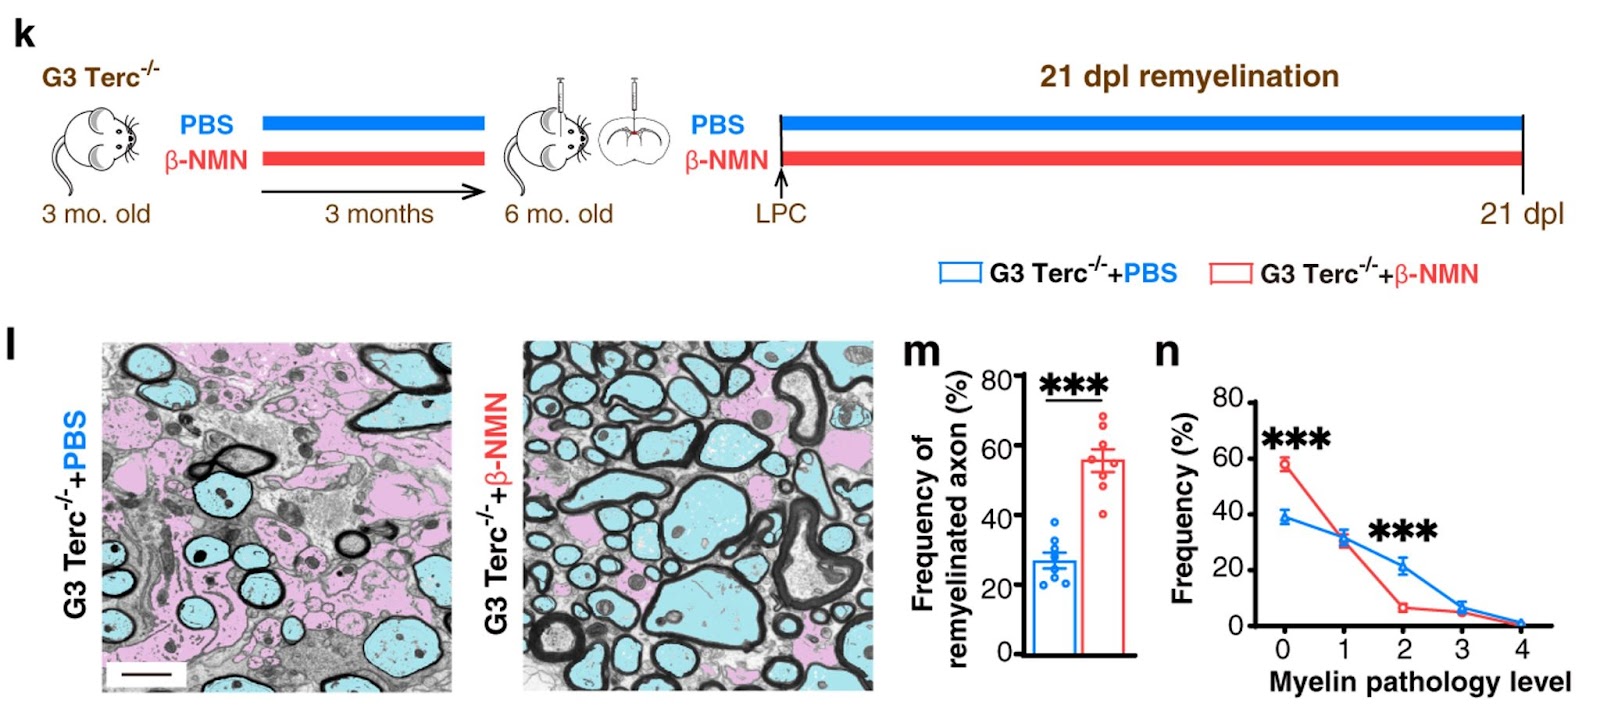 NMN enhances remyelination in aged mice.